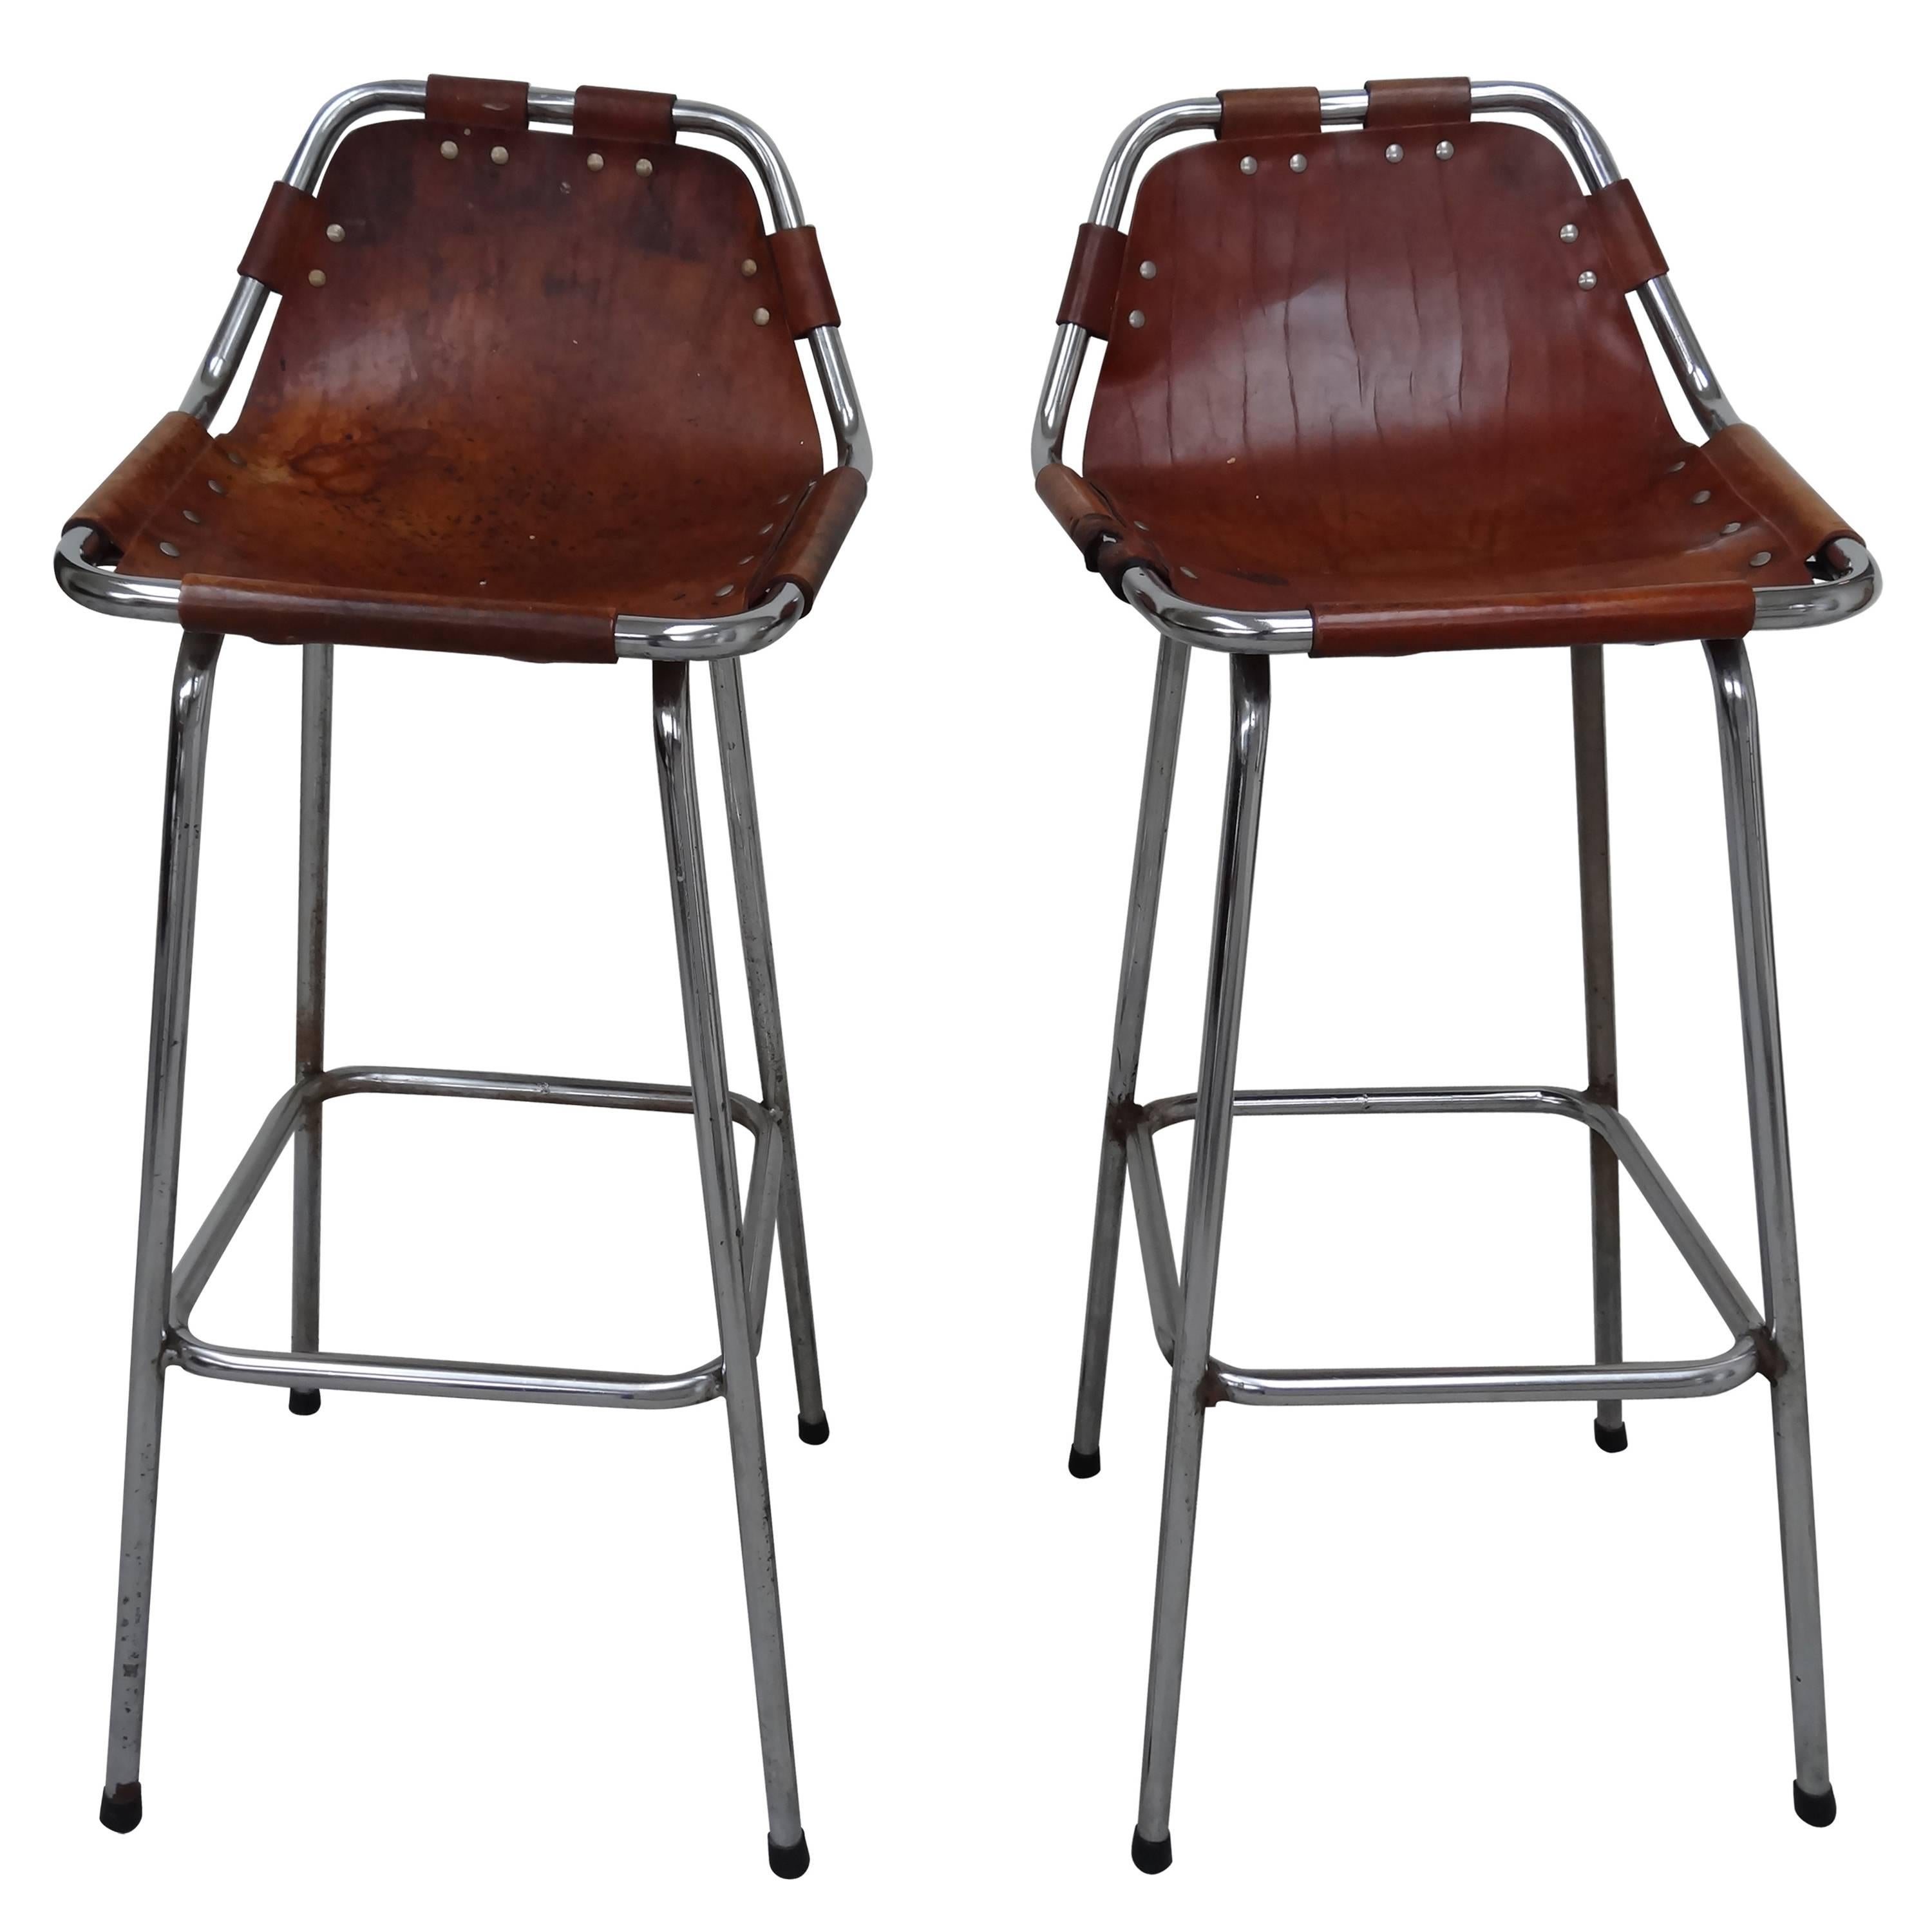 Selected by Charlotte Perriand for The Les Arcs Ski Resort, Two High Bar Stools